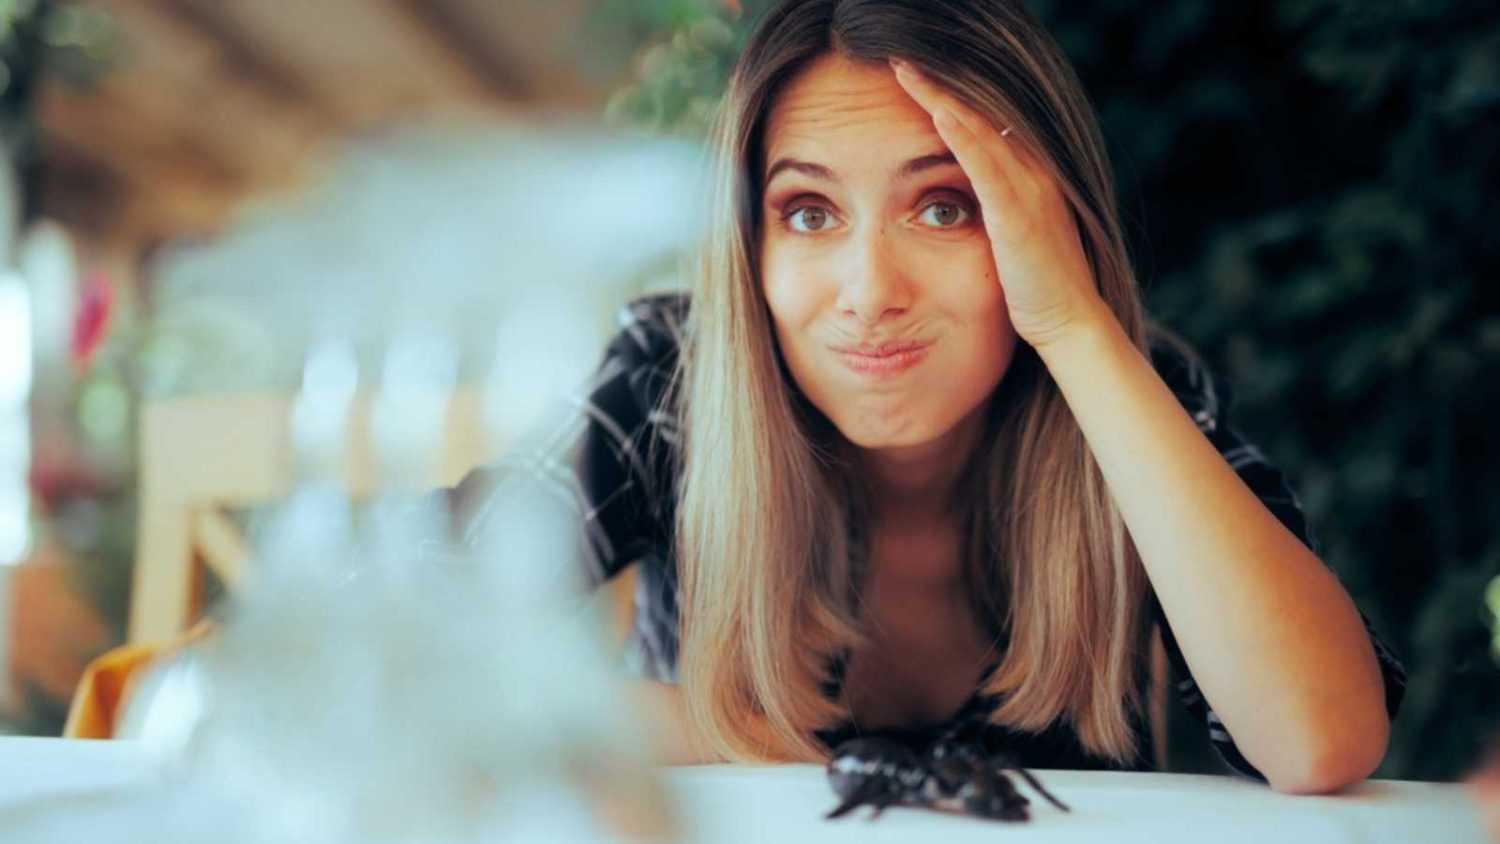 Unhappy woman at restaurant finding insect on table